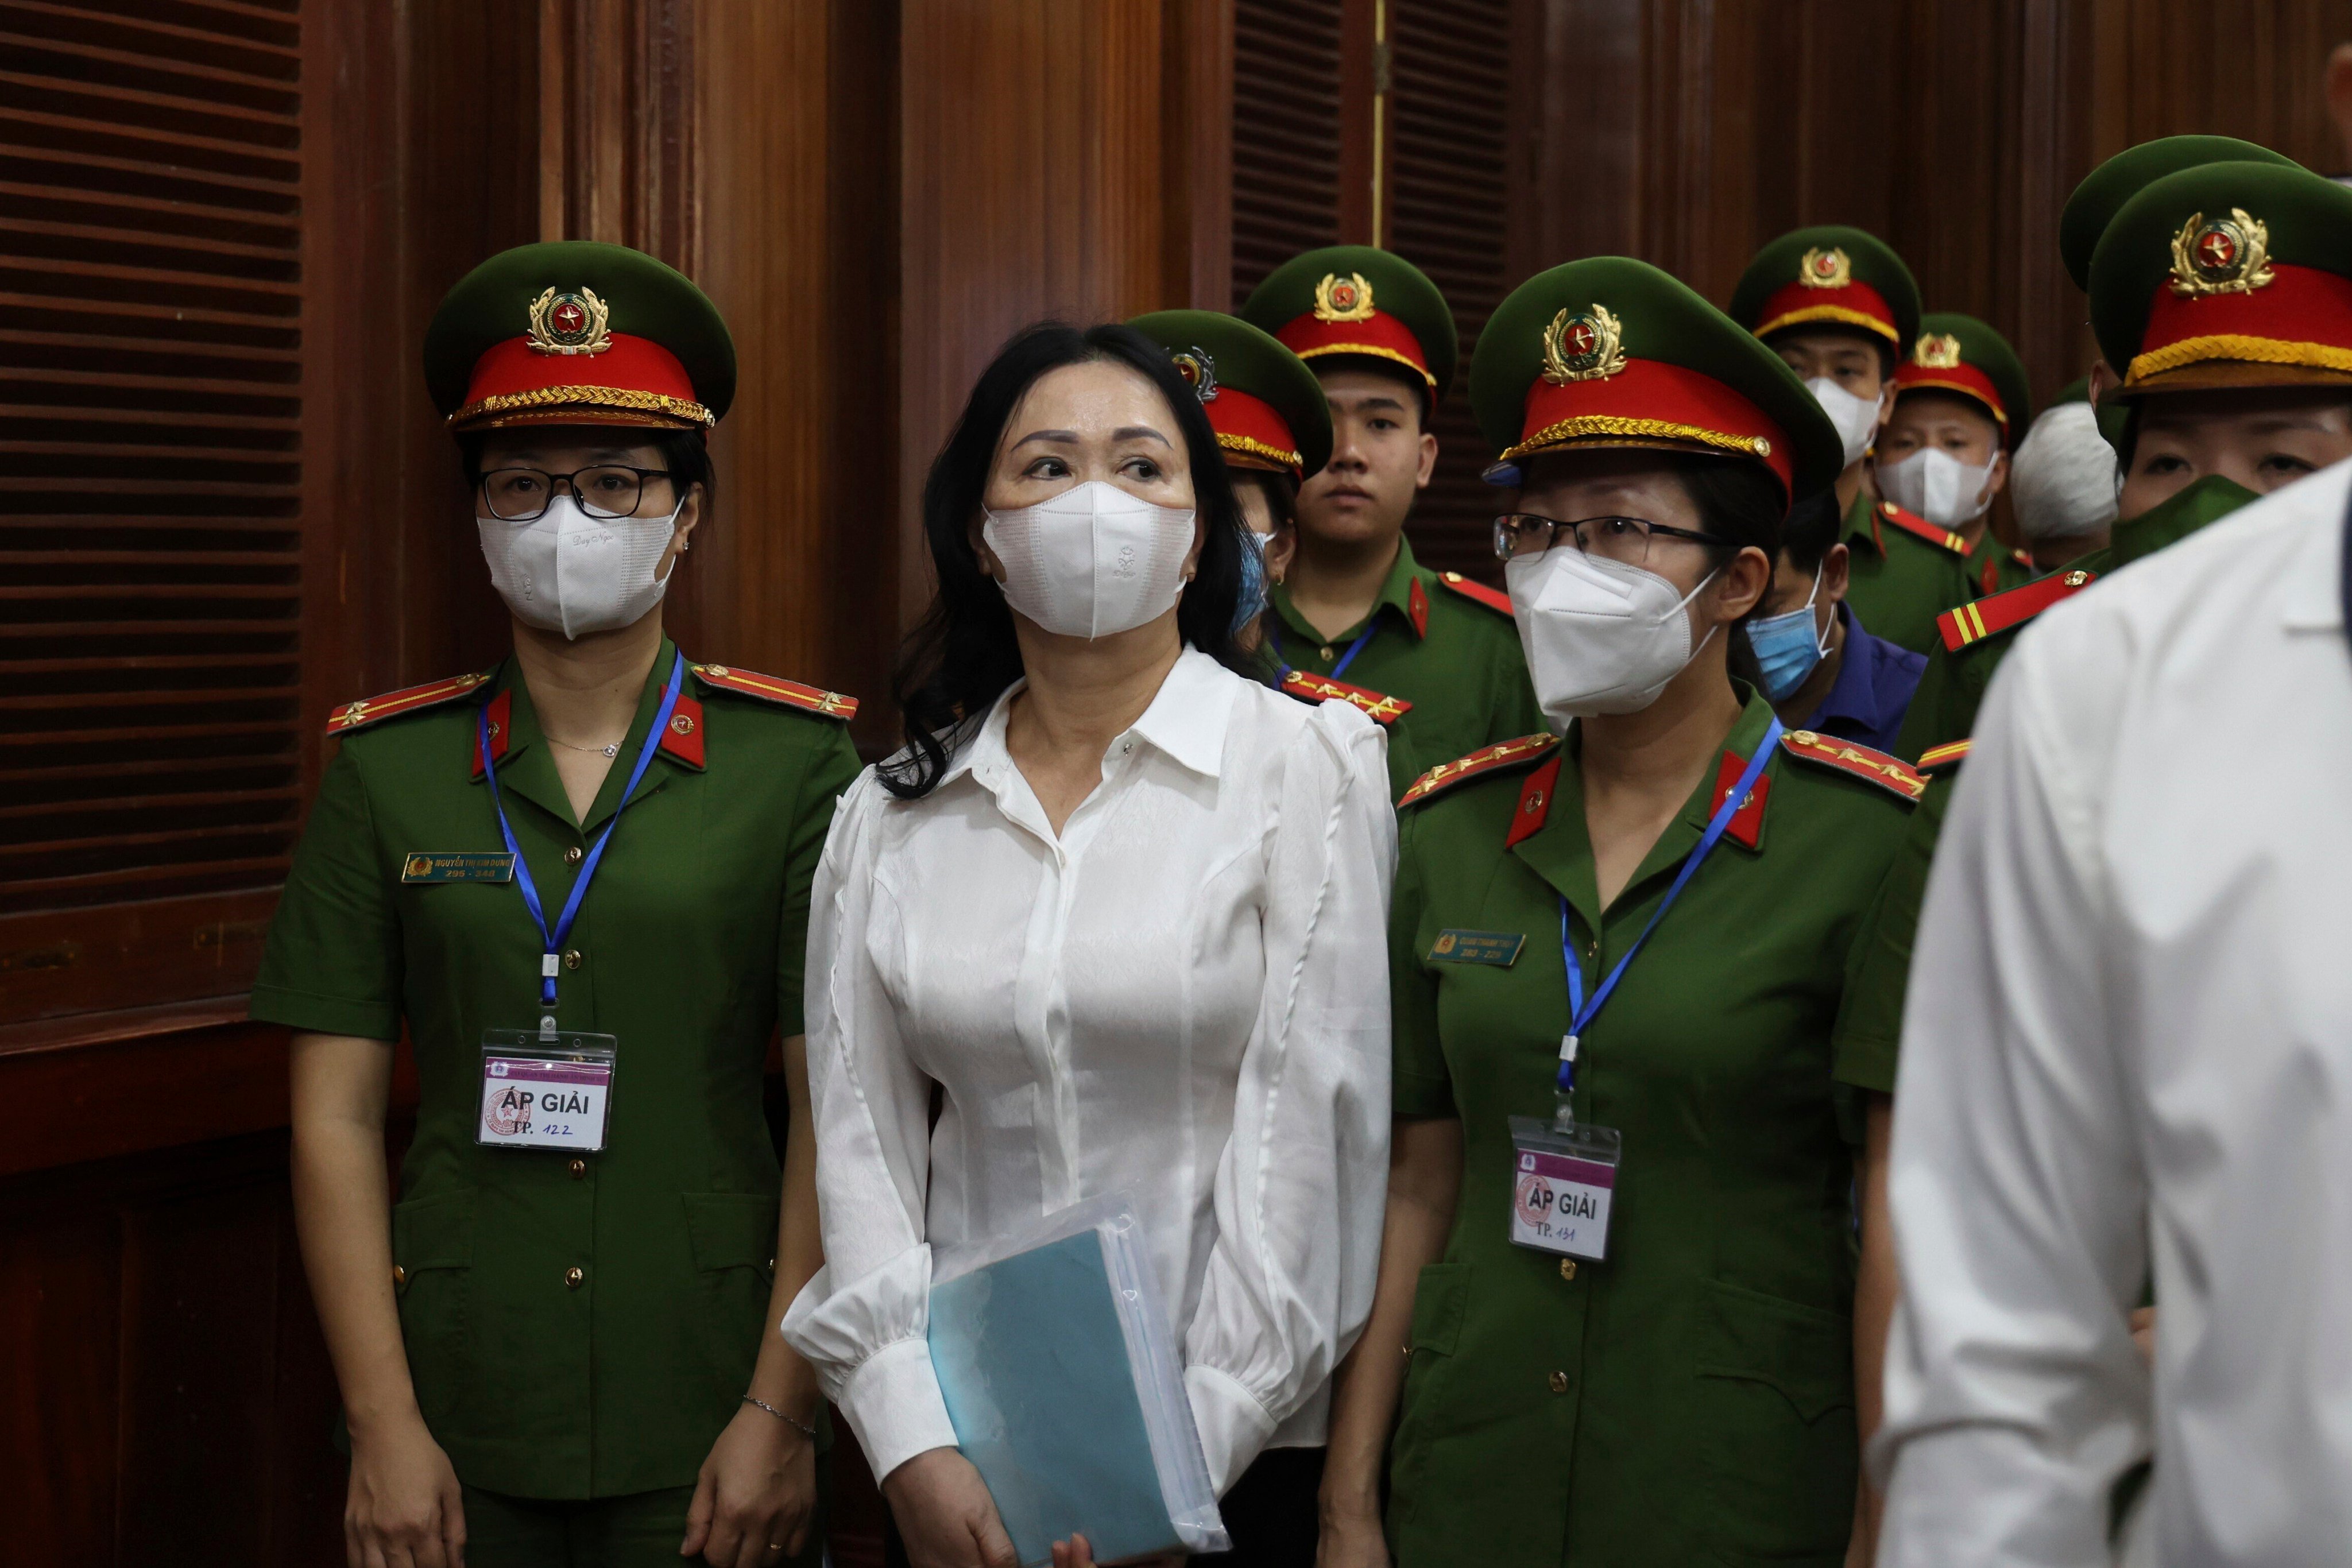 Vietnamese real estate tycoon Truong My Lan is escorted into a courtroom in Ho Chi Minh city. Lan faces the death penalty in a trial over alleged fraud amounting to nearly 3 per cent of the country’s 2022 GDP. Photo: AP